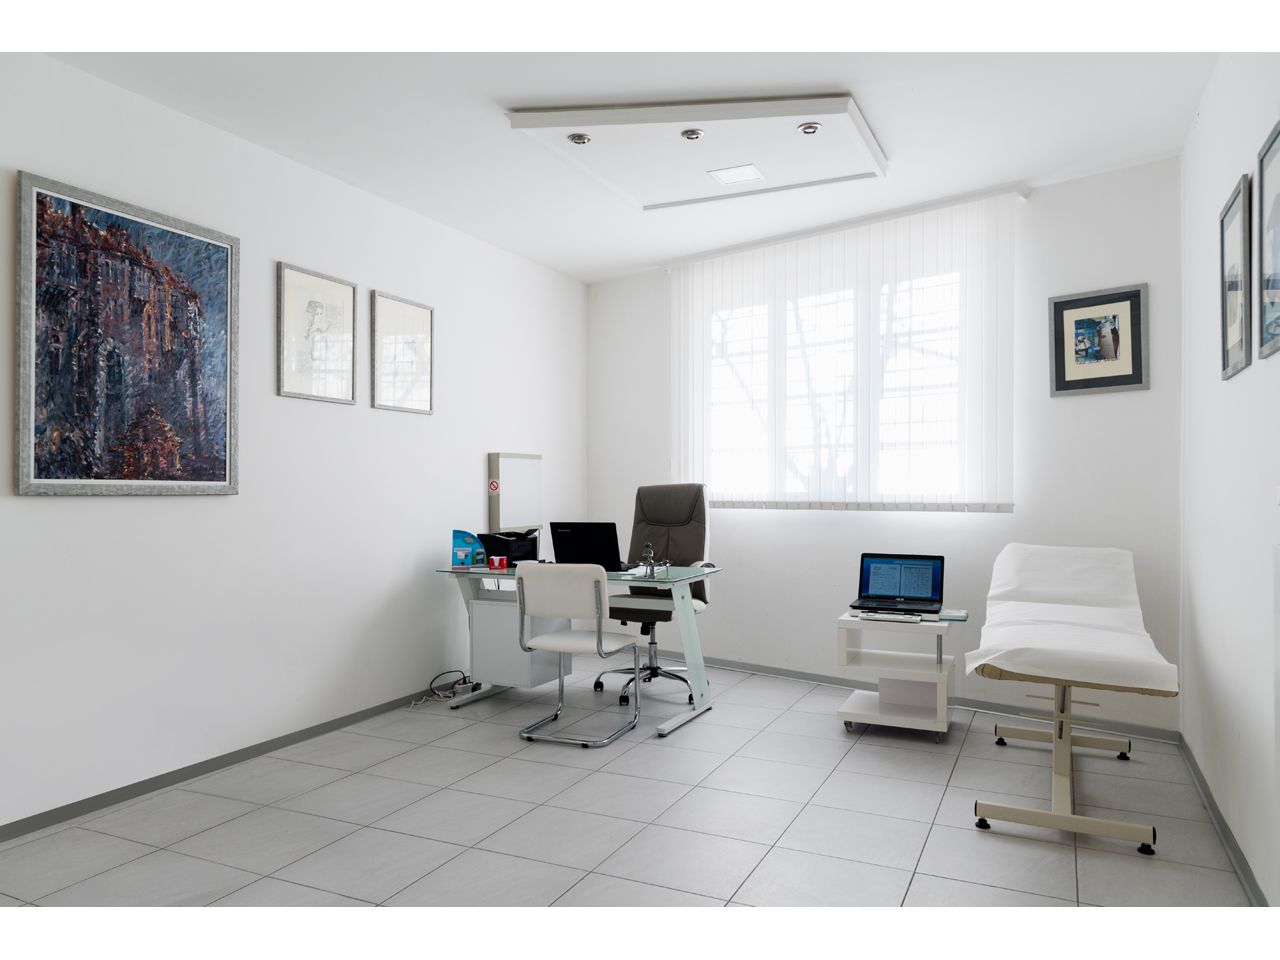 PAIN AND PHYSICAL THERAPY CENTER ANALGESIS Acupuncture Belgrade - Photo 4